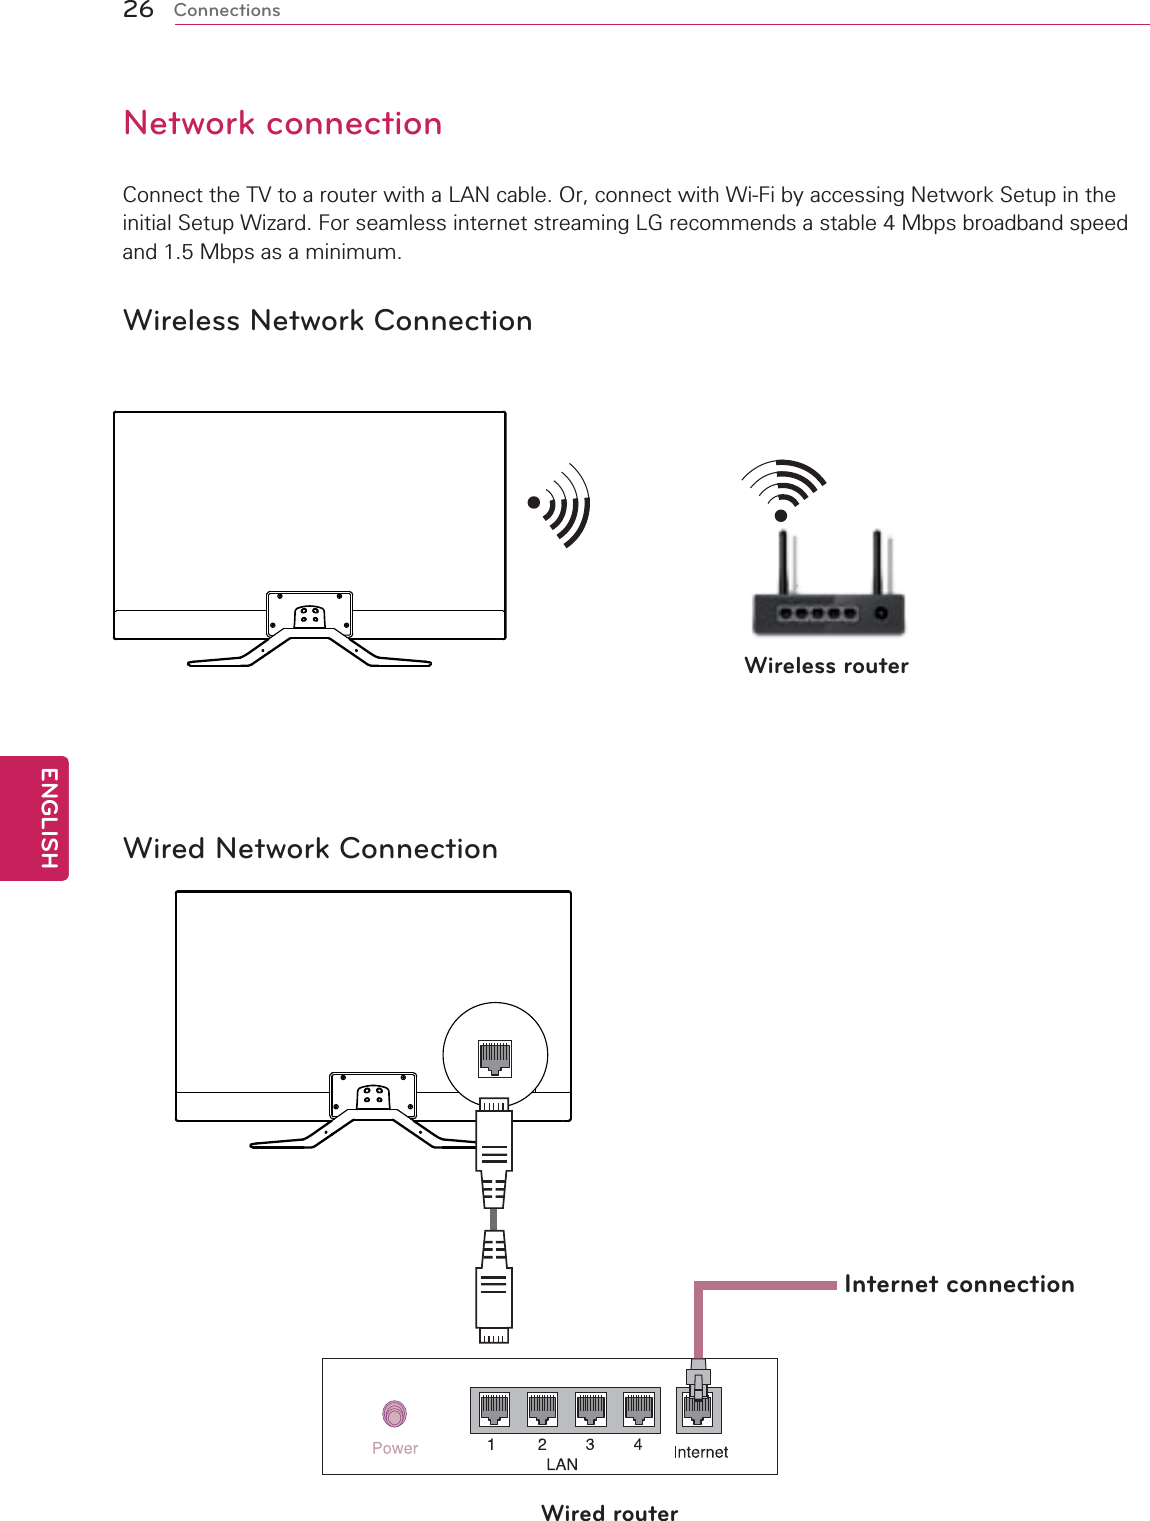 26ENGENGLISHConnectionsNetwork connectionConnect the TV to a router with a LAN cable. Or, connect with Wi-Fi by accessing Network Setup in the initial Setup Wizard. For seamless internet streaming LG recommends a stable 4 Mbps broadband speed and 1.5 Mbps as a minimum.Wireless Network ConnectionWired Network ConnectionInternet connectionWired routerWireless router